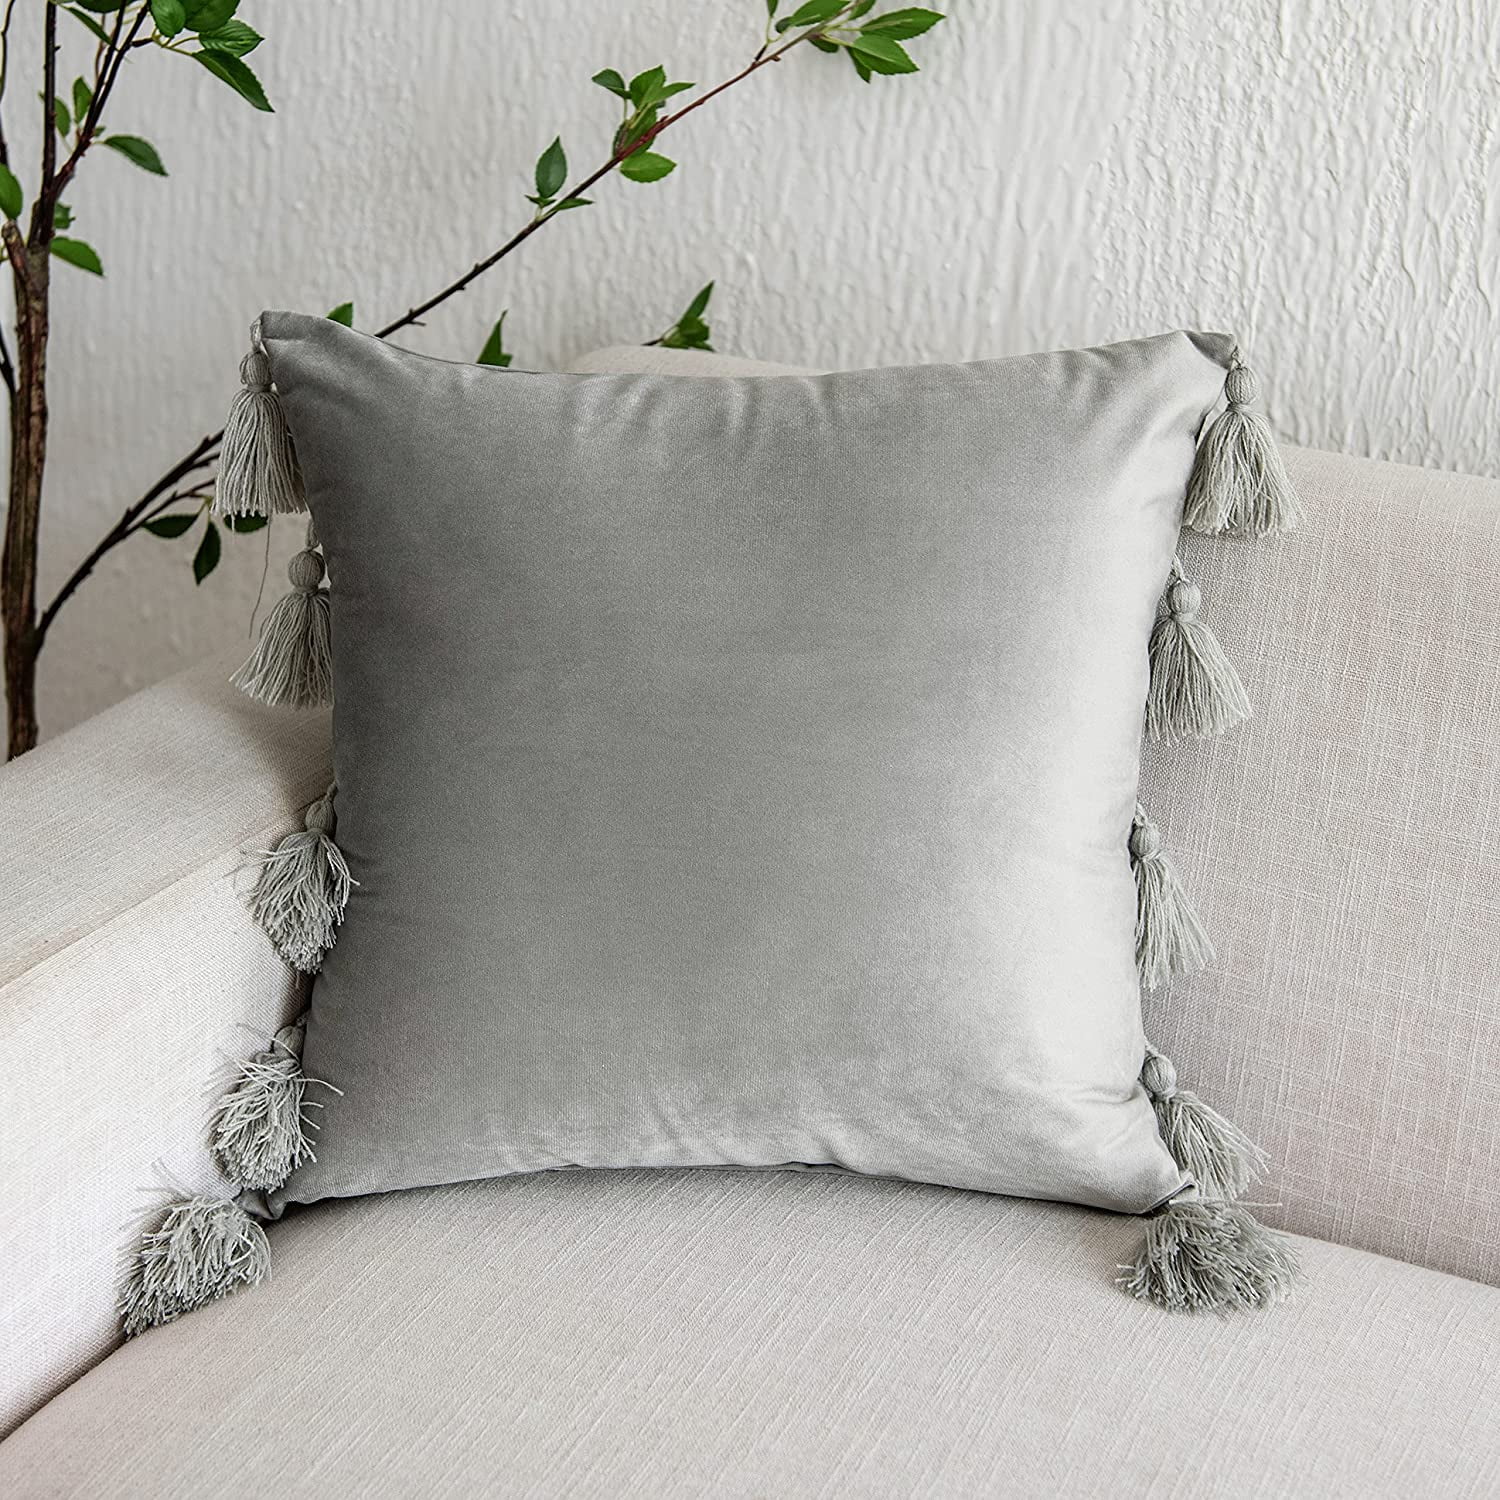 Longhui bedding Ivory White Throw Pillow Covers for Couch Sofa Chair,  Cotton Linen Decorative Pillows Cushion Covers, 18 x 18 inches, Set of 2,  No